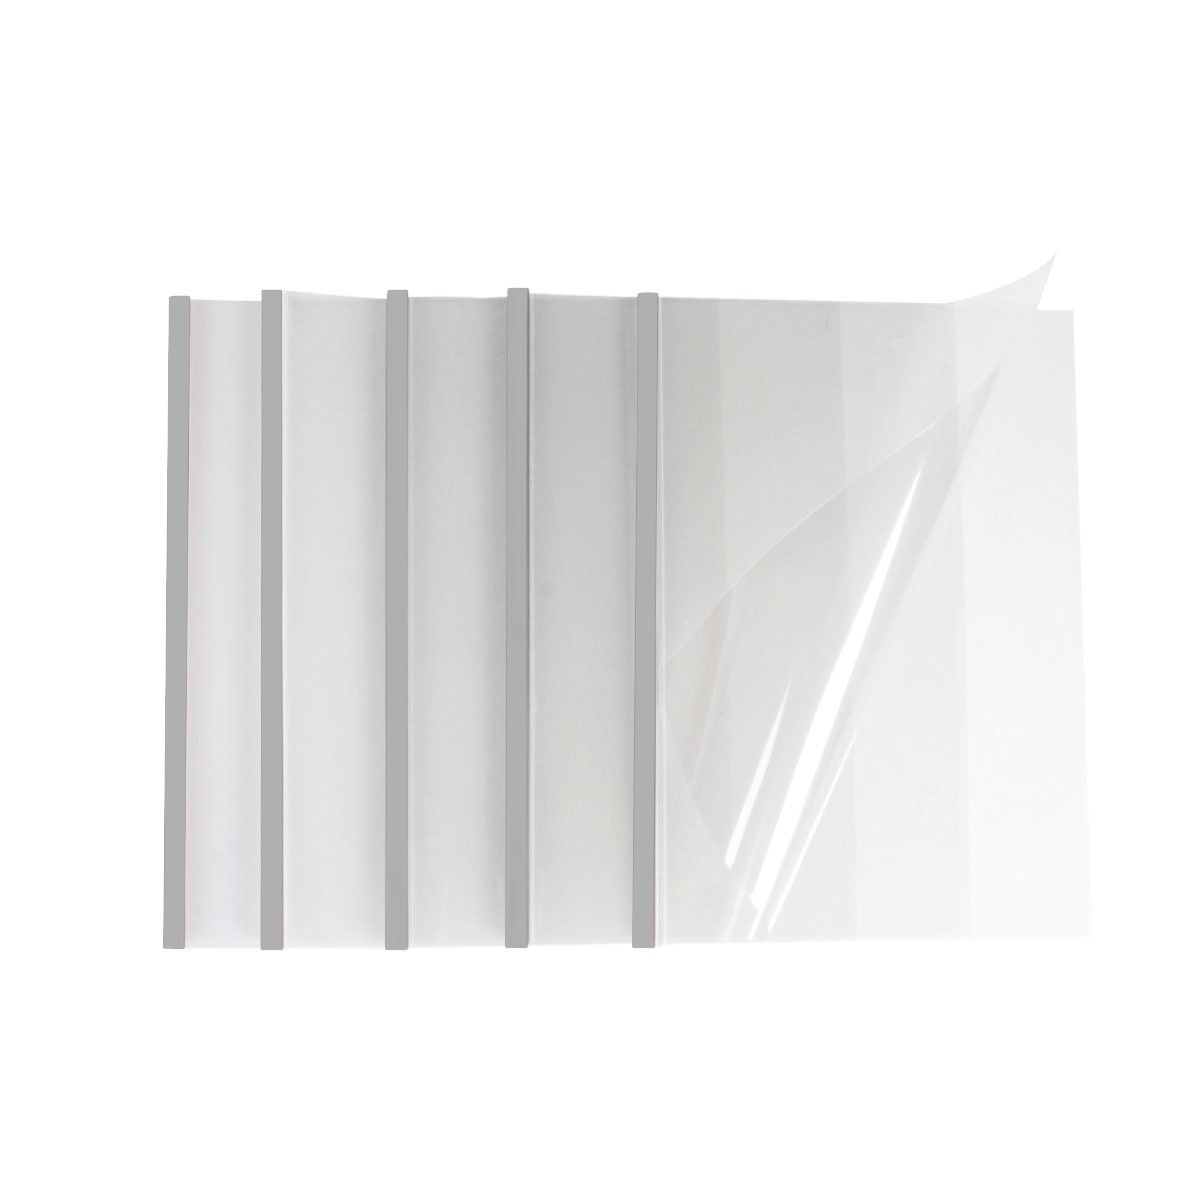 Masterbind Clear EASY Covers [Silver Channel, 40 Sheets Capacity,Size 5] - 40/Bx